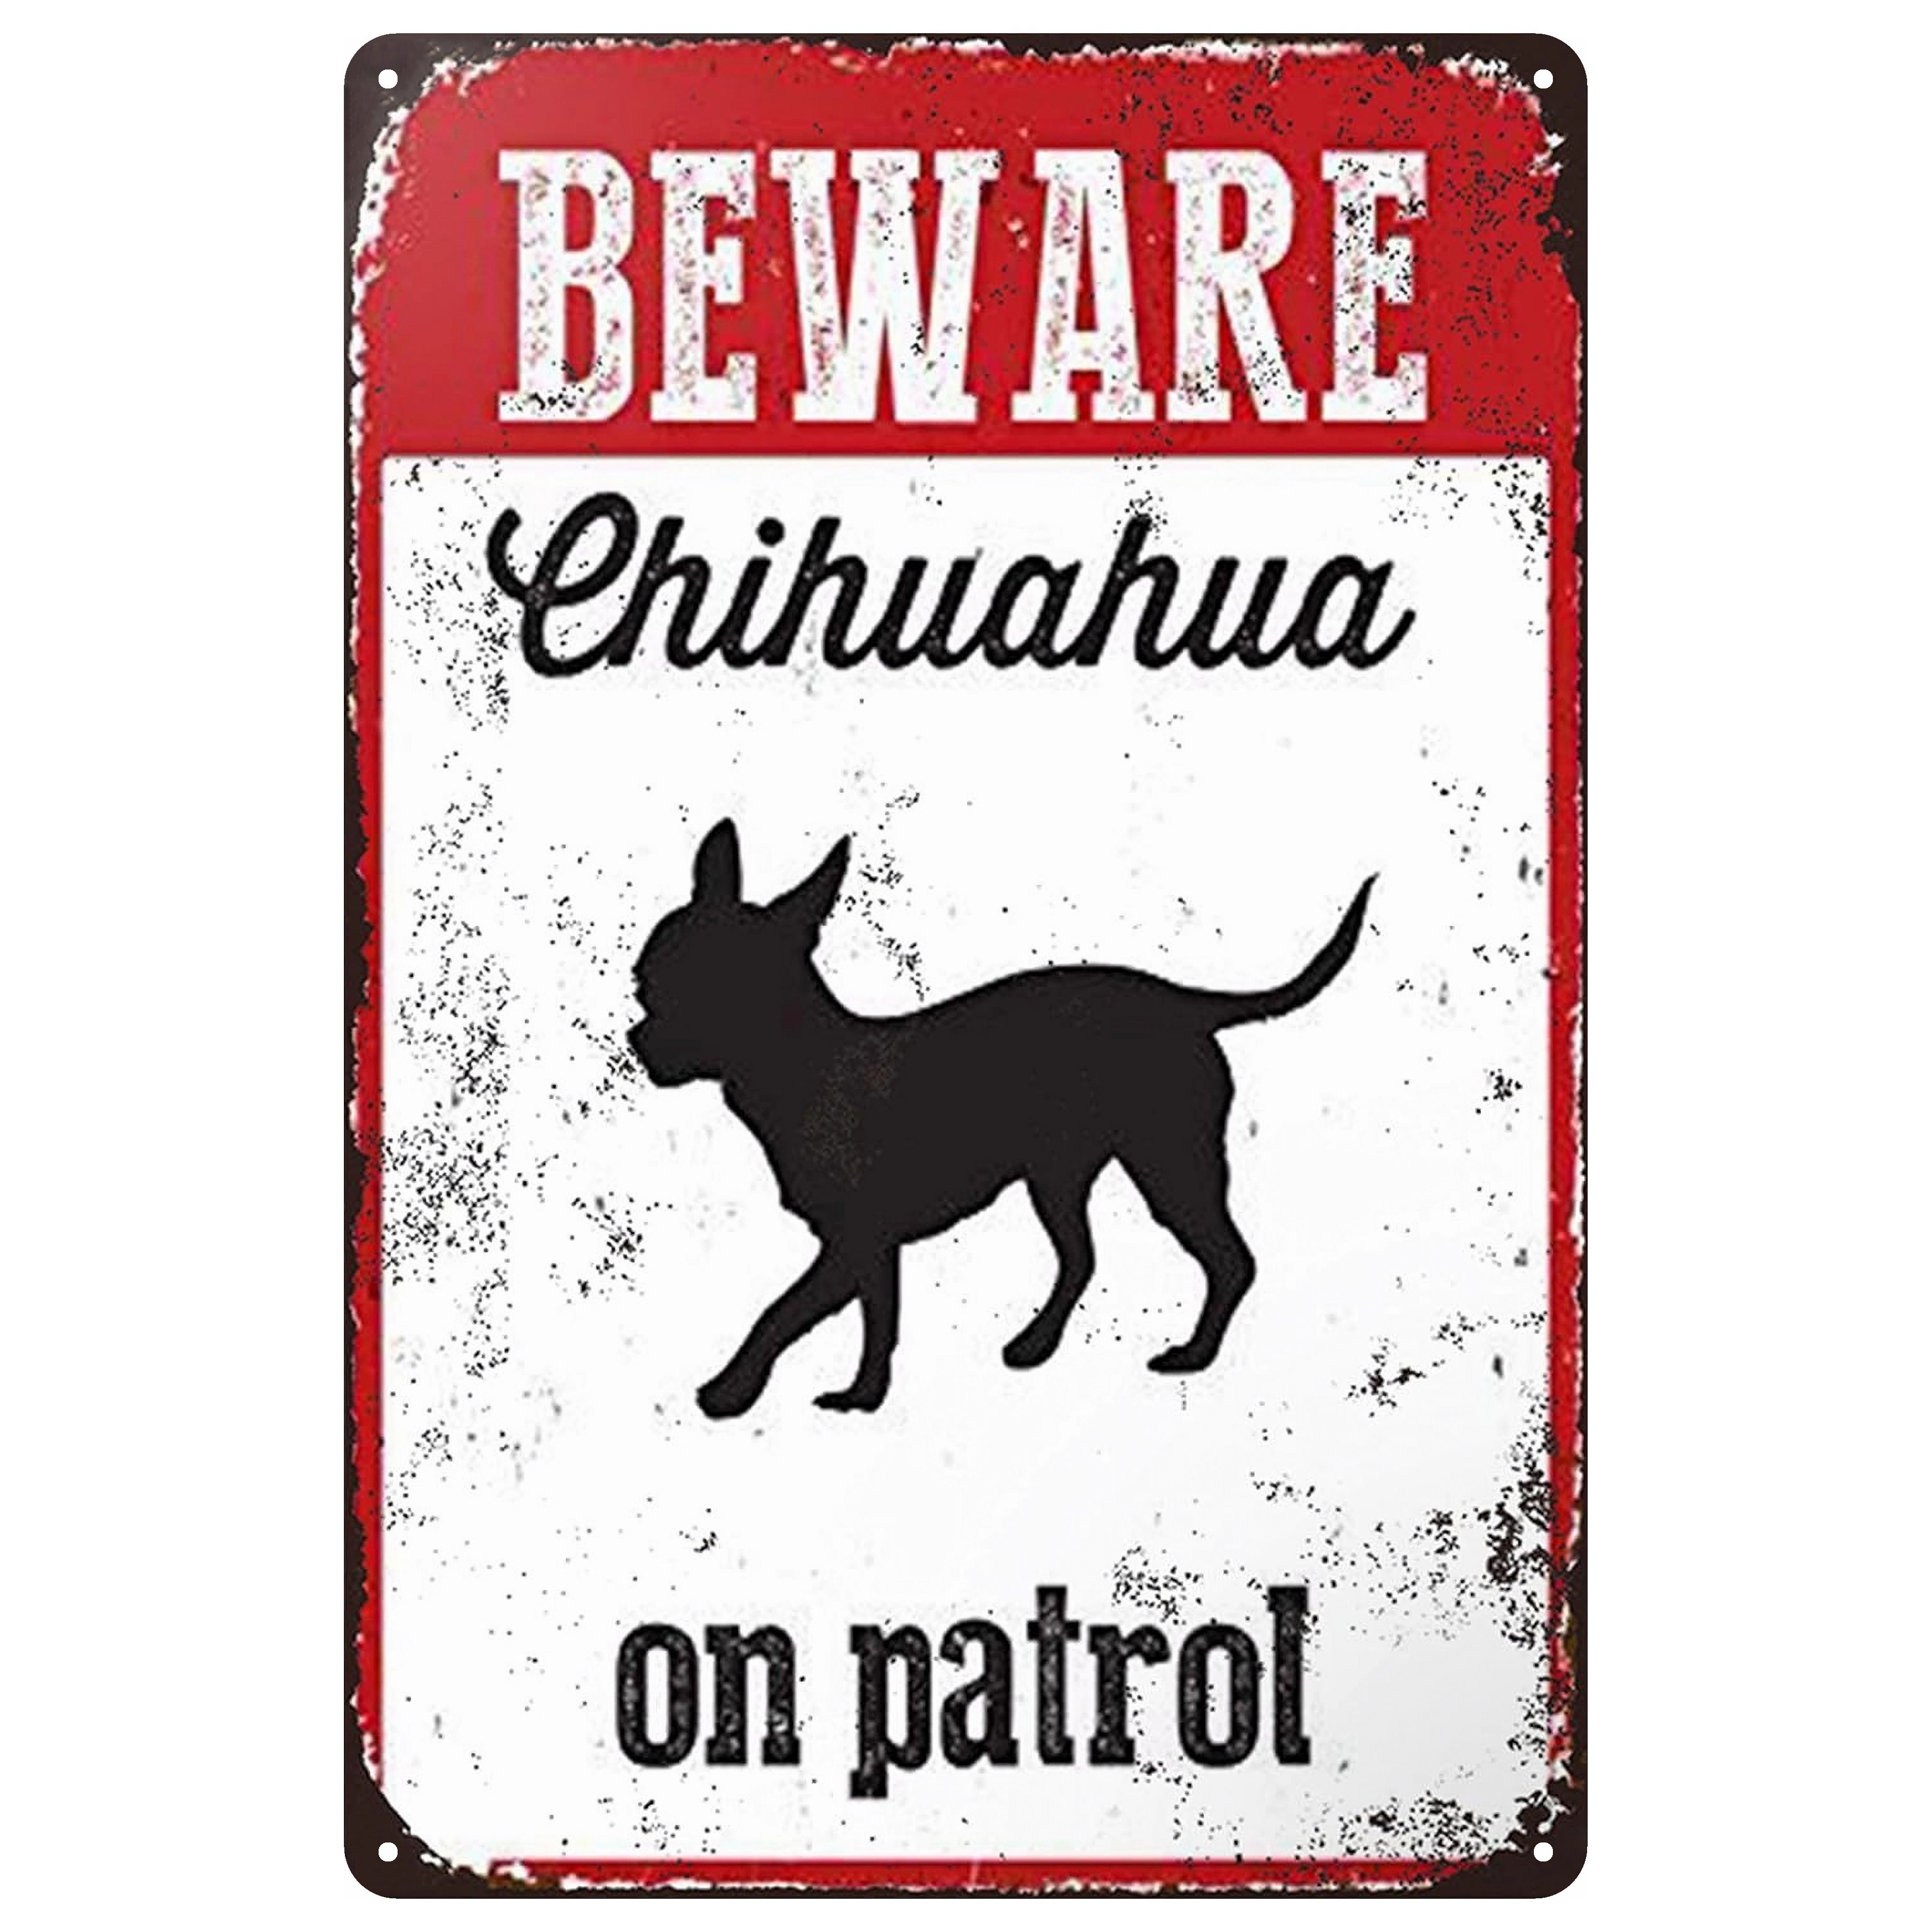 

1pc Warning Metal Tin Sign, Chihuahua On Patrol, Suitable For Outdoor Patio/indoor Home Wall Decor, Cafe Bar Decor, Also A Fun Gift 8x12inch